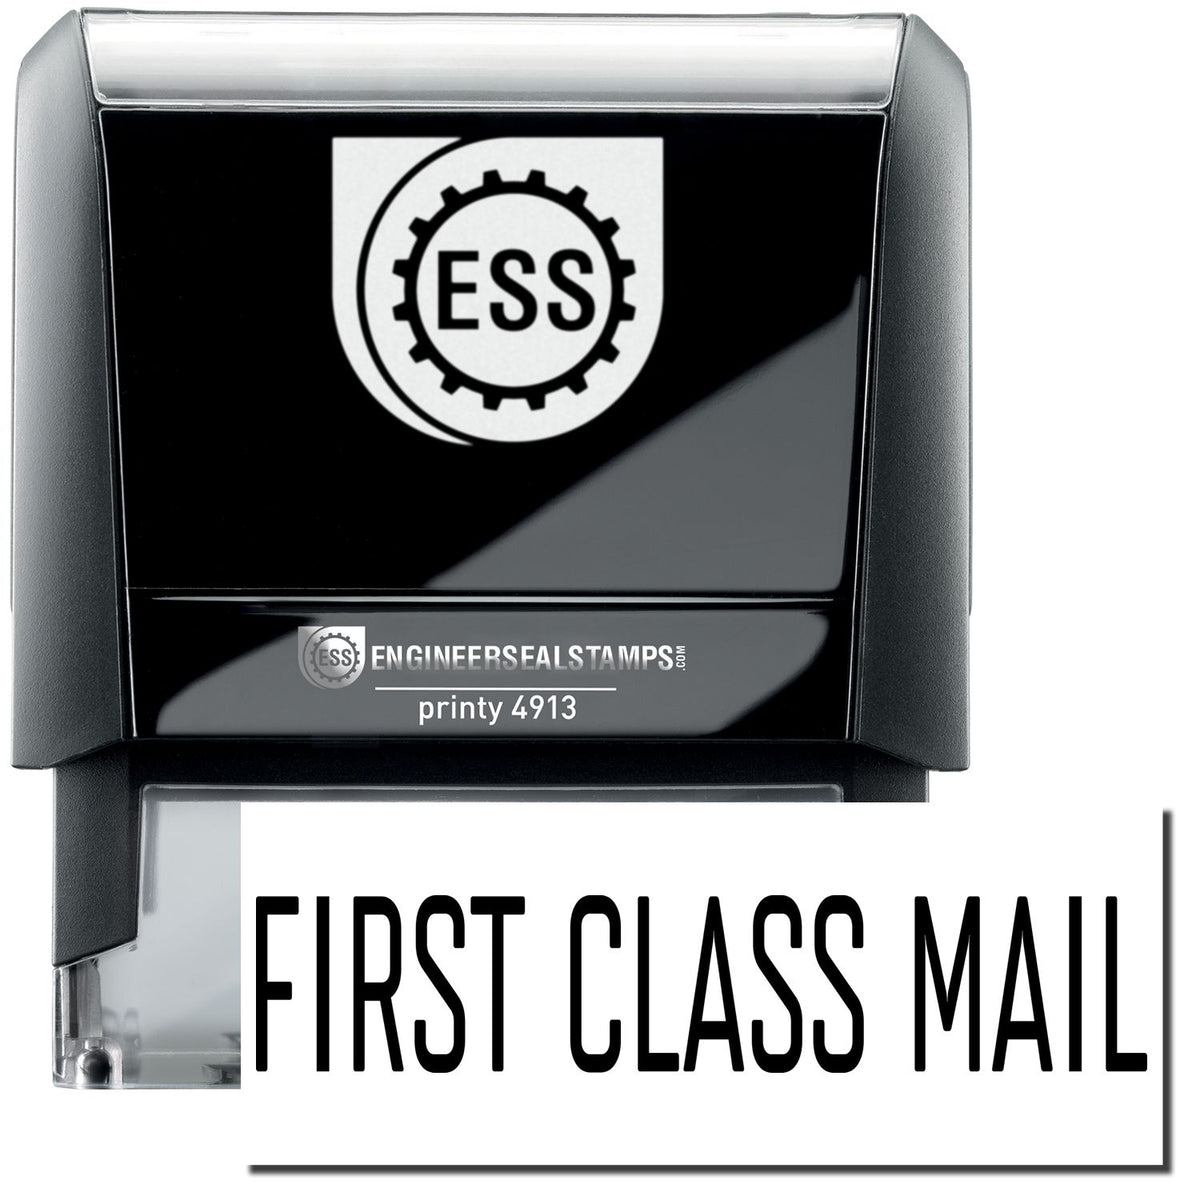 A self-inking stamp with a stamped image showing how the text &quot;FIRST CLASS MAIL&quot; in a large narrow font is displayed by it after stamping.